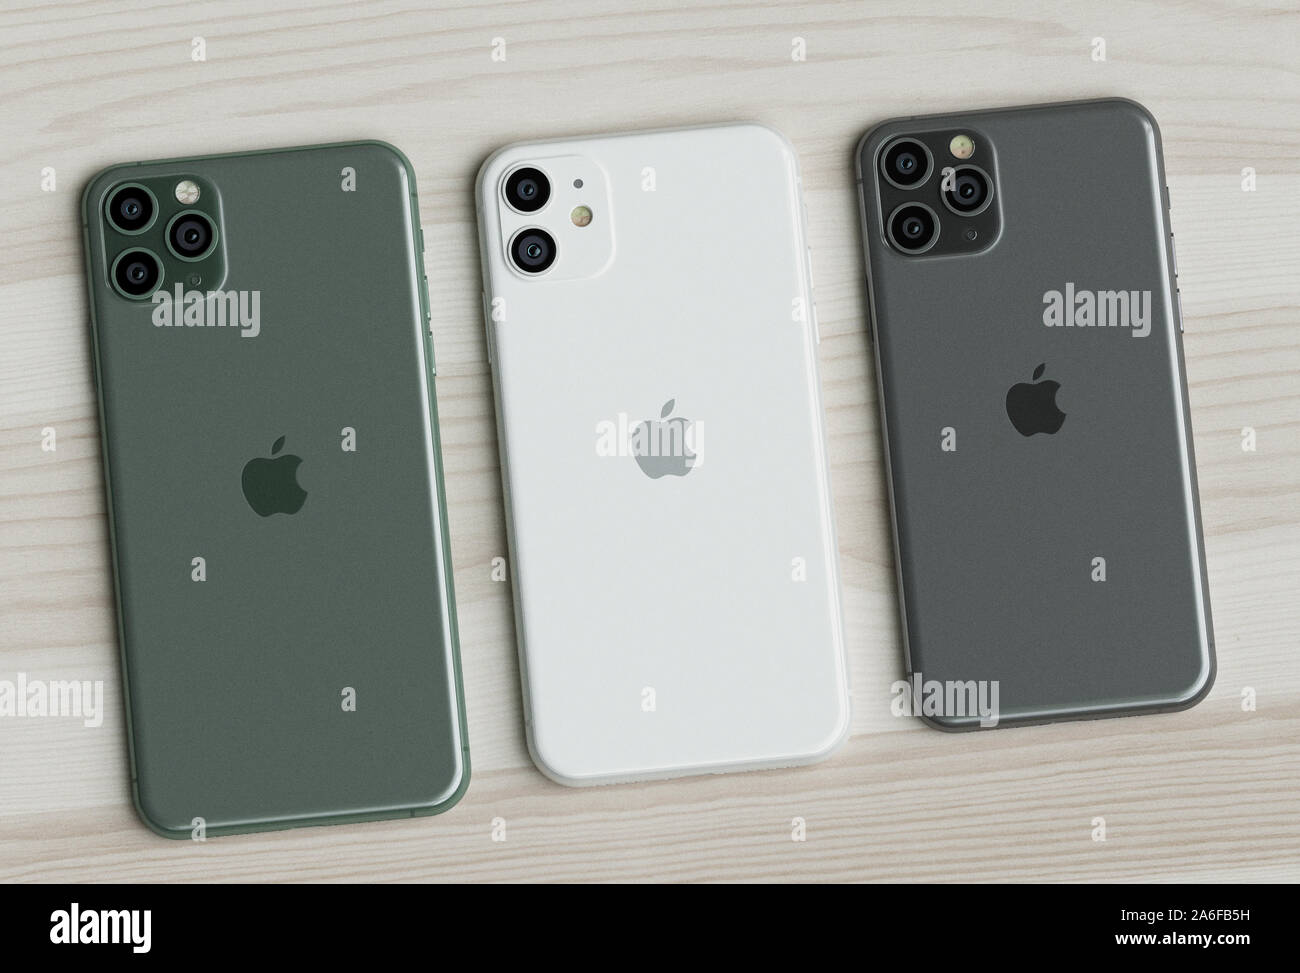 ITALY -22 SEPTEMBER, 2019: Iphone 11, 11 Pro and 11 Max smartphones on table. Latest Apple Mobile iphones model. Illustrative editorial. Stock Photo